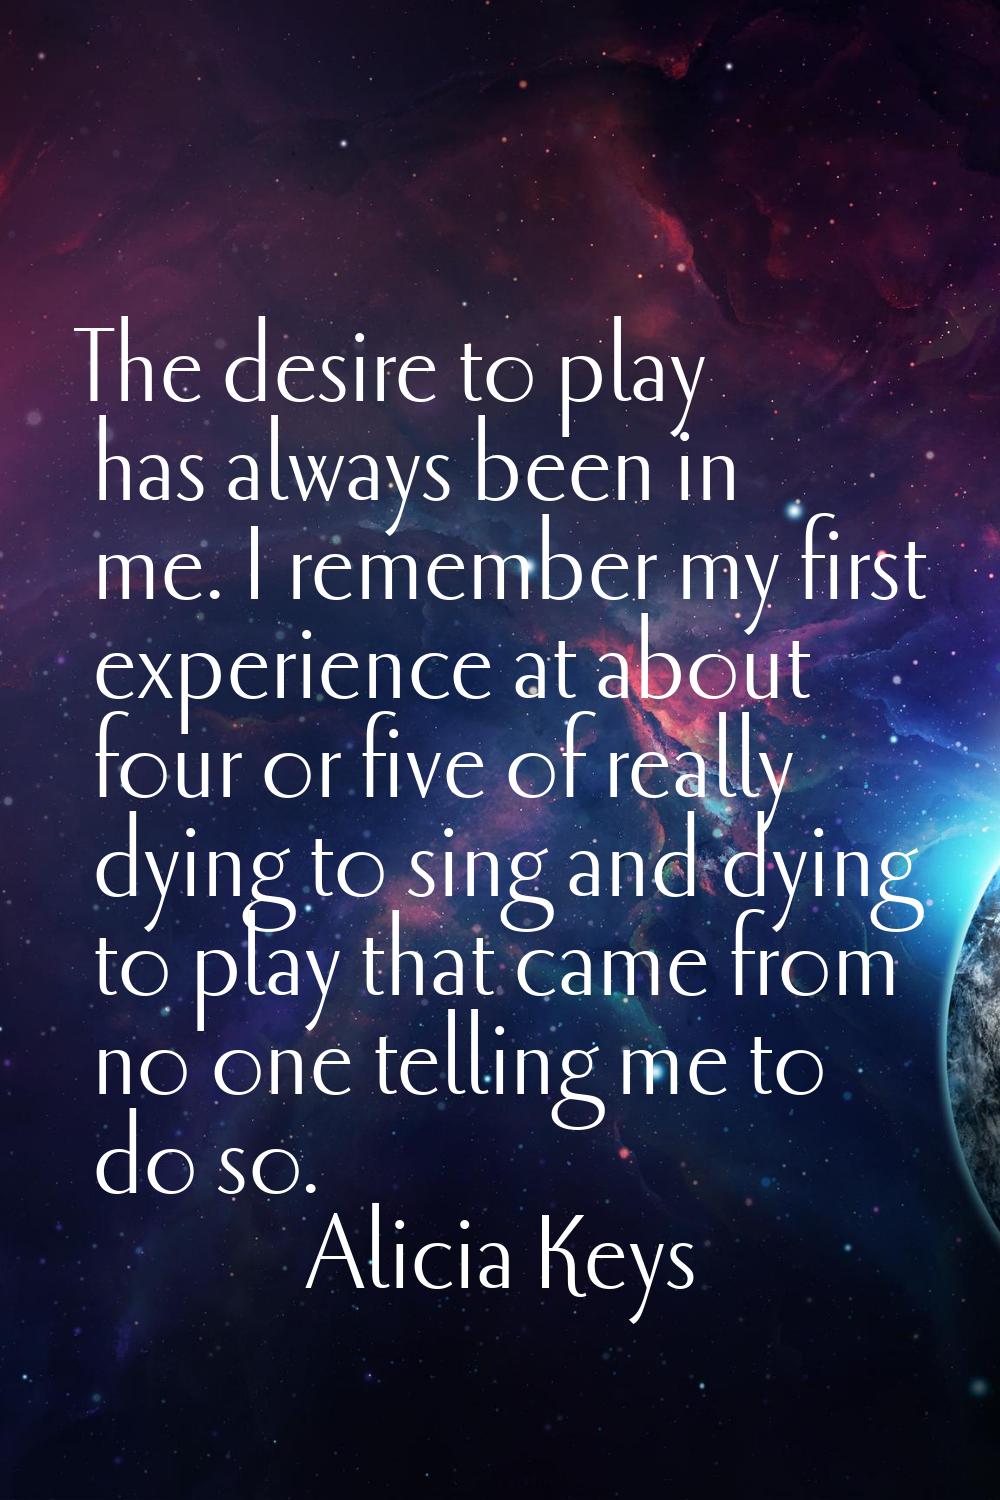 The desire to play has always been in me. I remember my first experience at about four or five of r